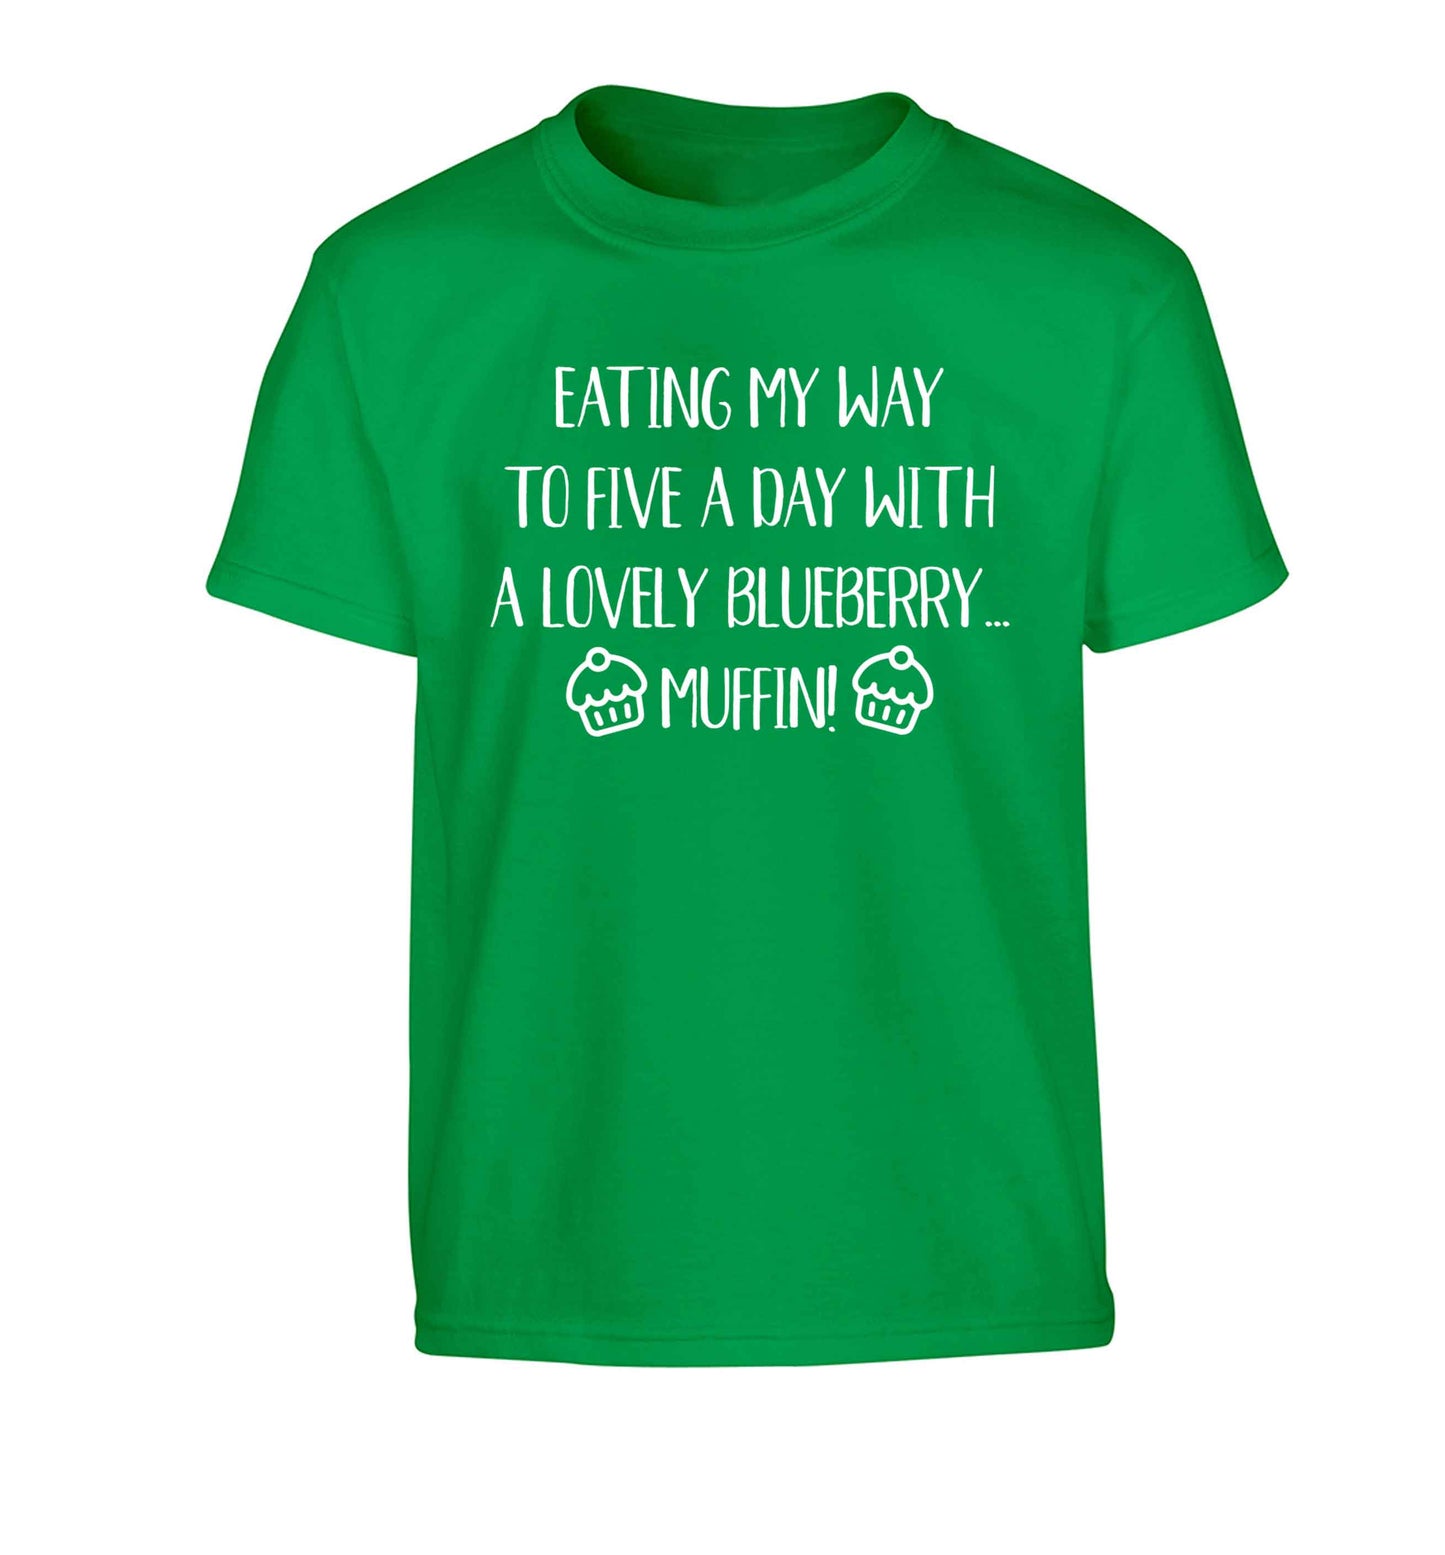 Eating my way to five a day with a lovely blueberry muffin Children's green Tshirt 12-13 Years